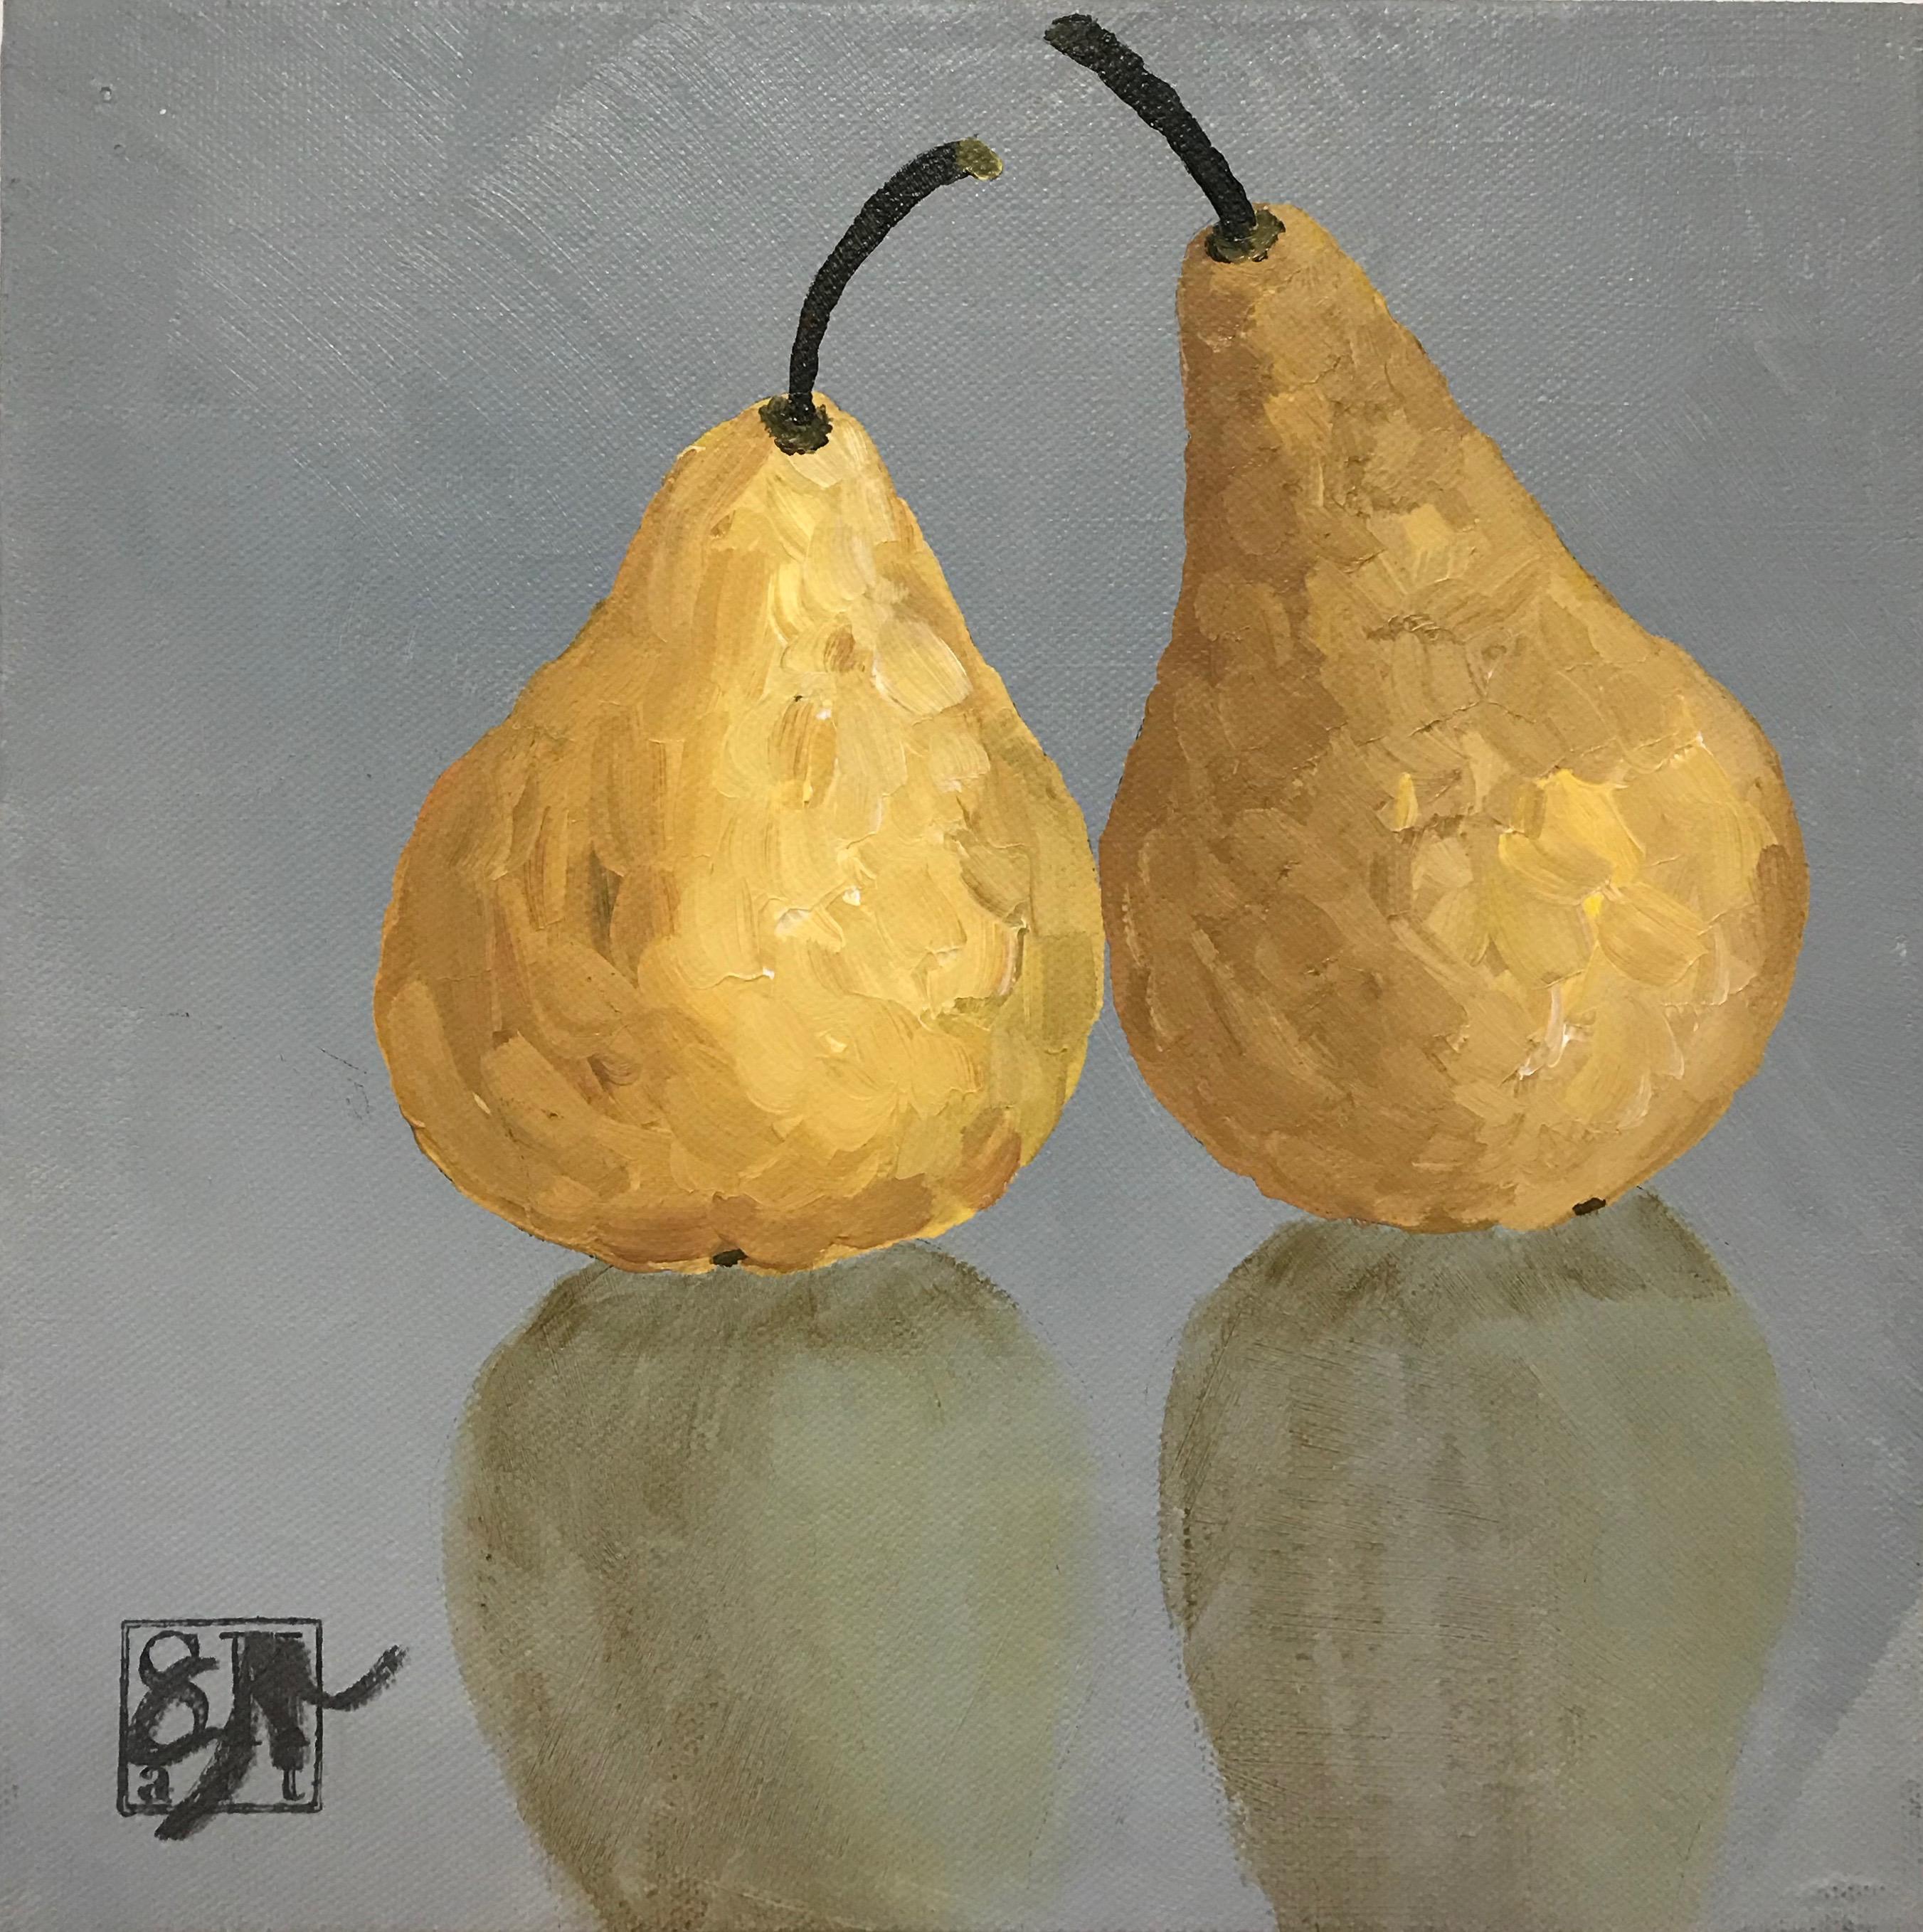 'Pears' is a petite contemporary still-life painting of square format created by American artist Susan Kinsella in 2018. Featuring a lovely palette made of warm yellow, grey and green, the painting captures our attention with its close view of a